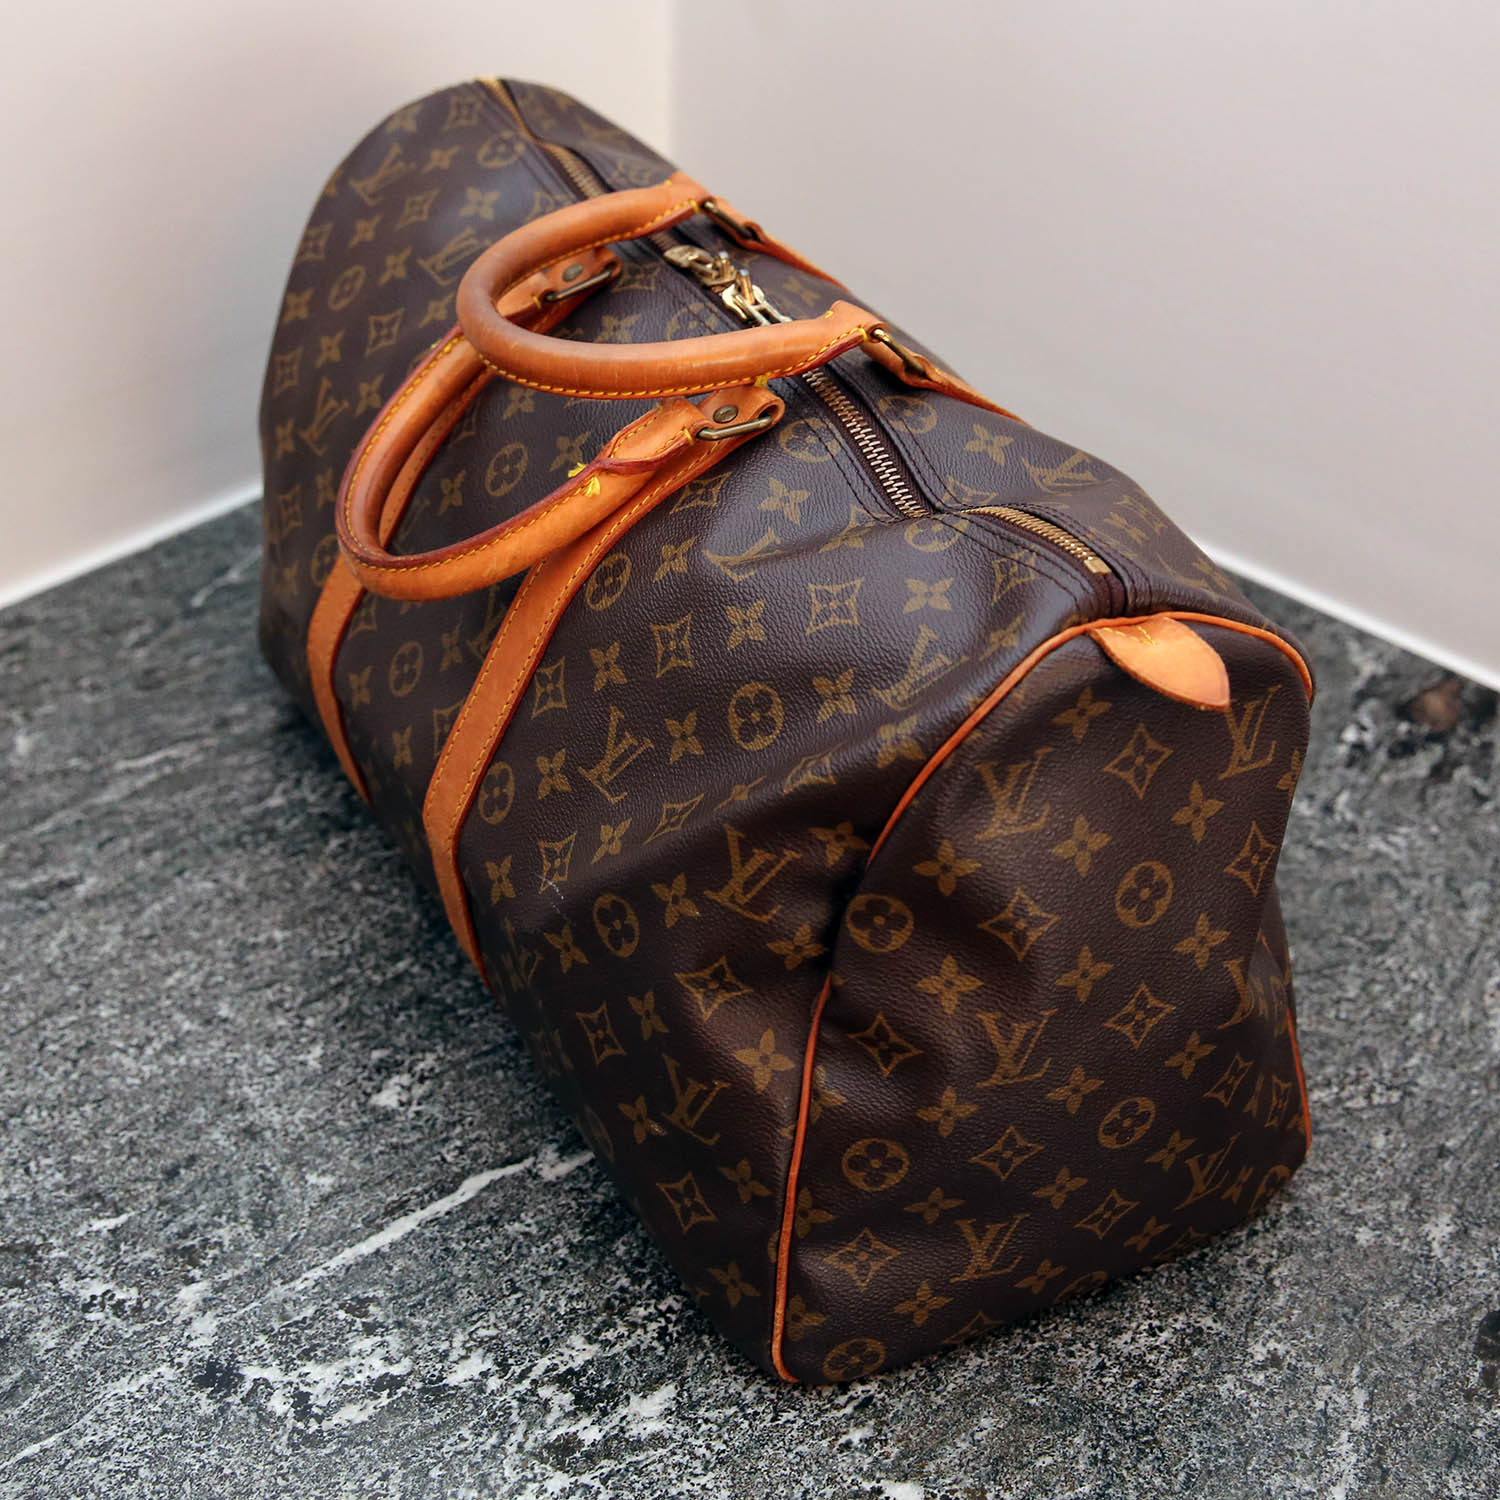 Louis Vuitton Keepall 45 - literacybasics.ca - Pre-owned Louis Vuitton and other luxury brands